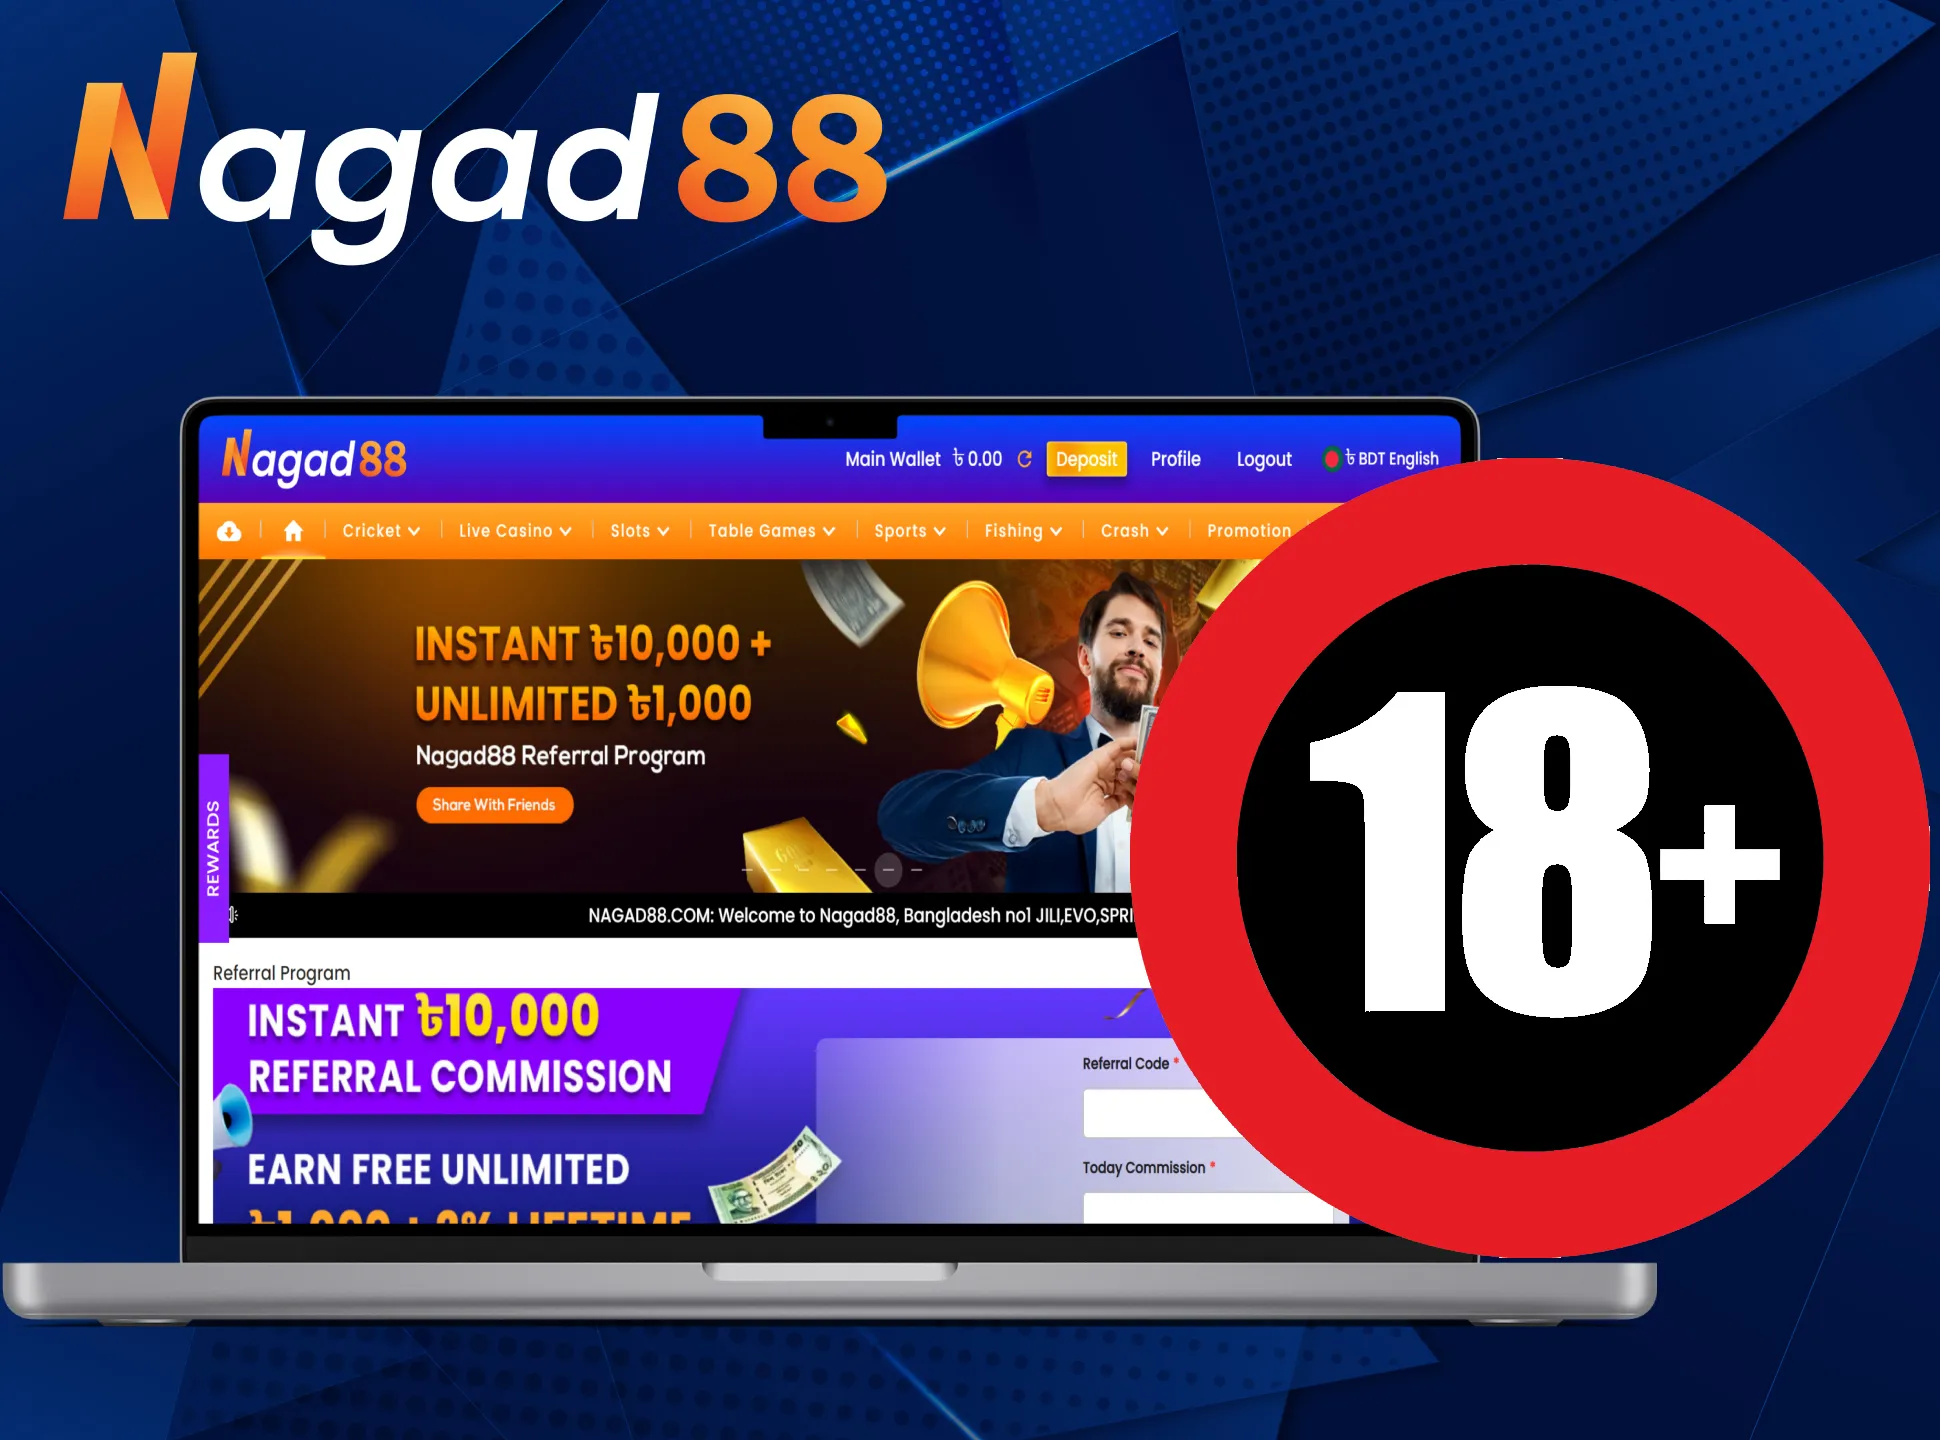 Learn how to protect yourself from scammers with Nagad88.